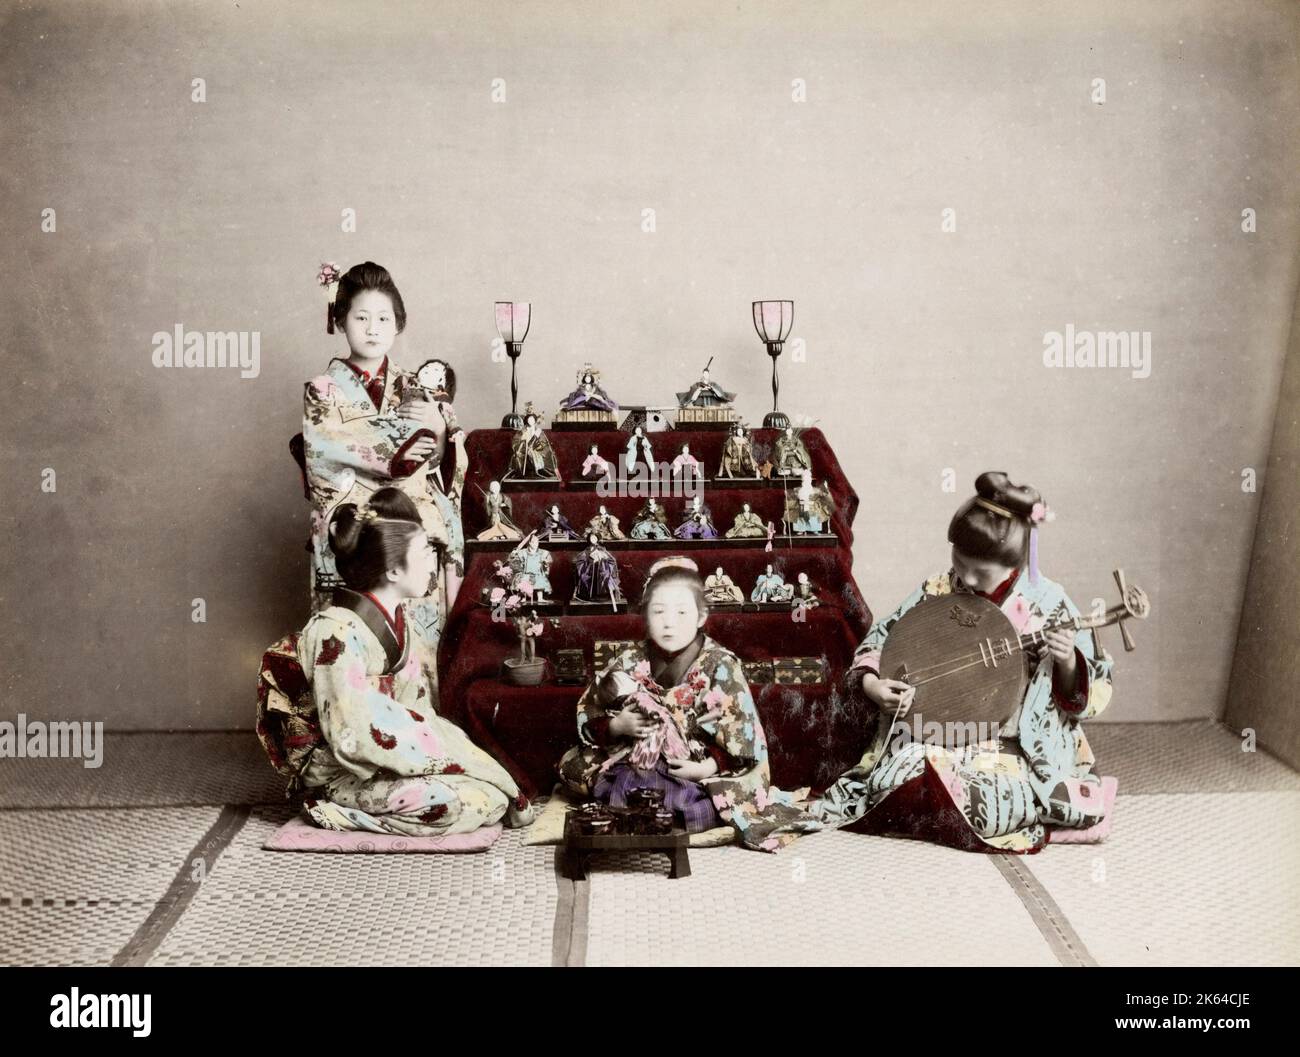 Vintage 19th century photograph - Meiji era Japan: Girls Festival, March. Hinamatsuri, also called Doll's Day or Girls' Day, is a special day in Japan. Celebrated on 3 March of each year, platforms covered with a red carpet-material are used to display a set of ornamental dolls representing the Emperor, Empress, attendants, and musicians in traditional court dress of the Heian period. Stock Photo